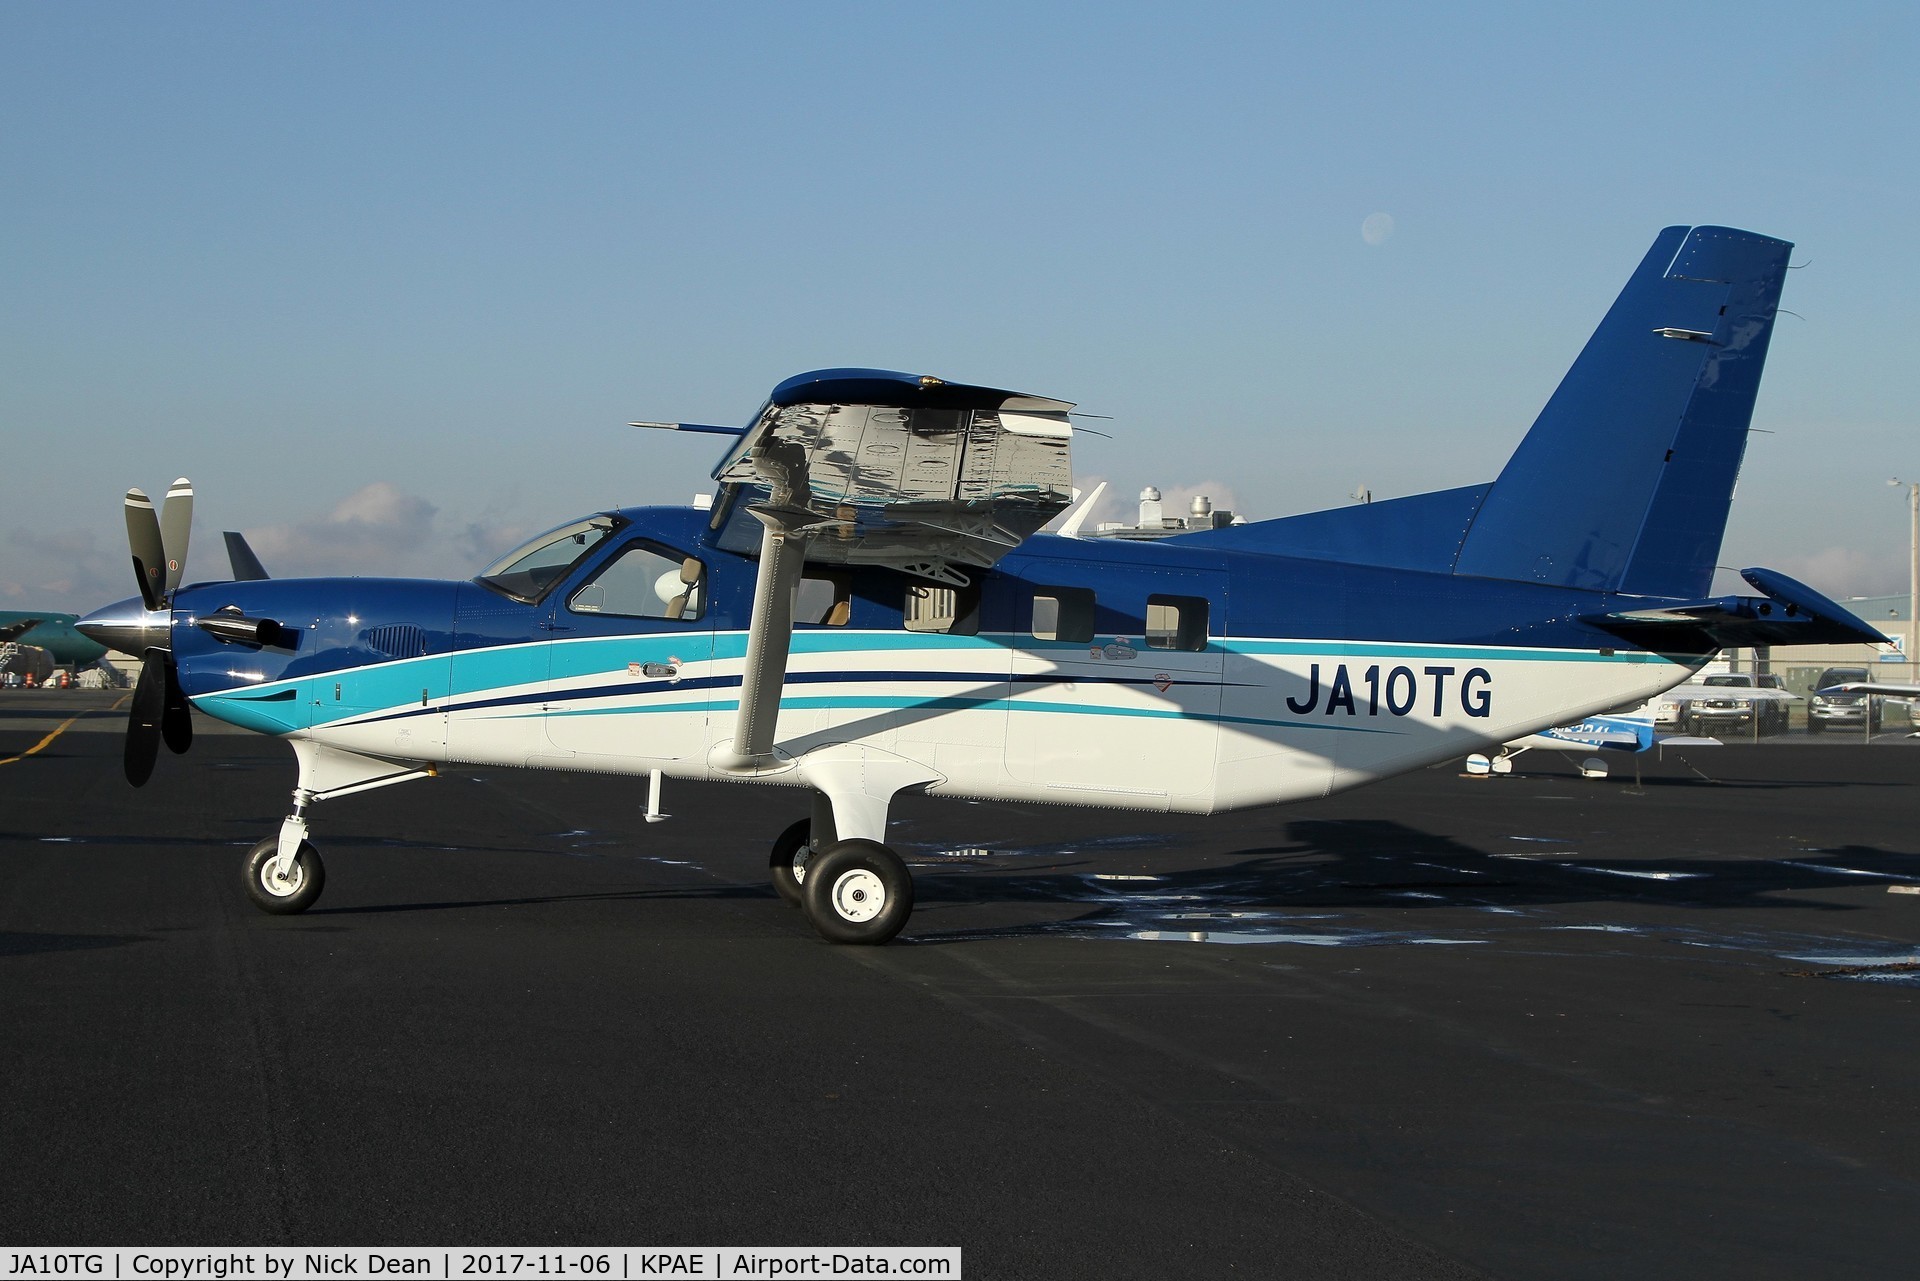 JA10TG, 2017 Quest Kodiak 100 C/N 100-0225, PAE/KPAE sitting outside the paint shop, didn't get the c/n off the data plate and haven't been able to find out which one it is yet, now confrimed as 100-0225